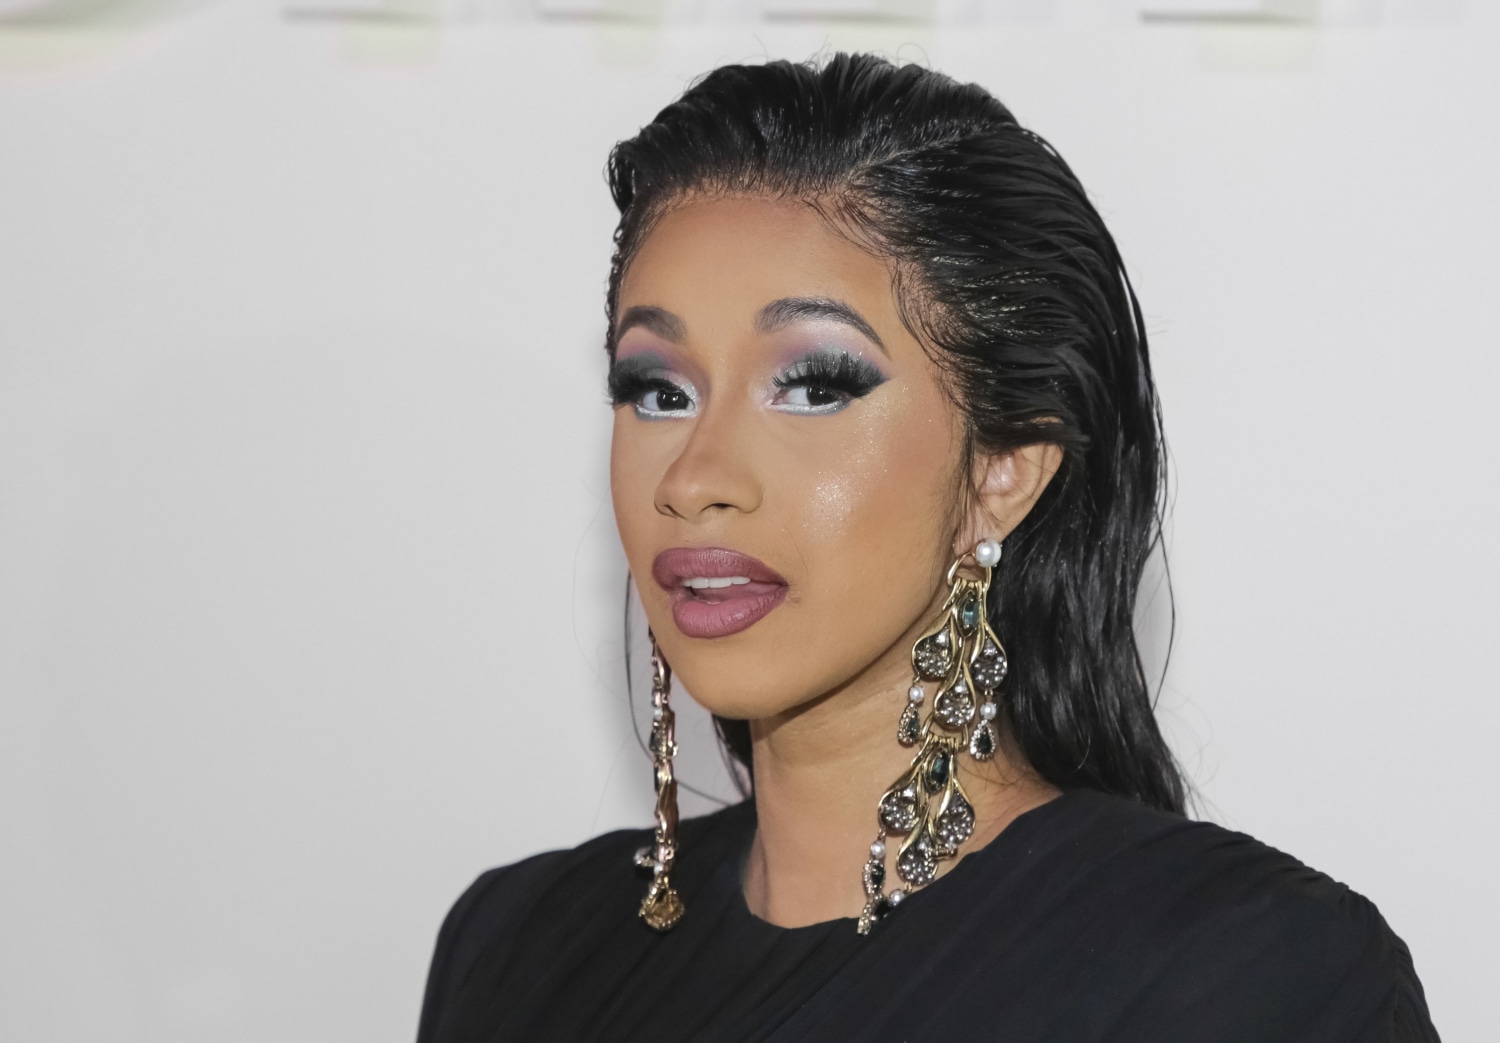 Cardi B says celebrities are causing confusion about the coronavirus